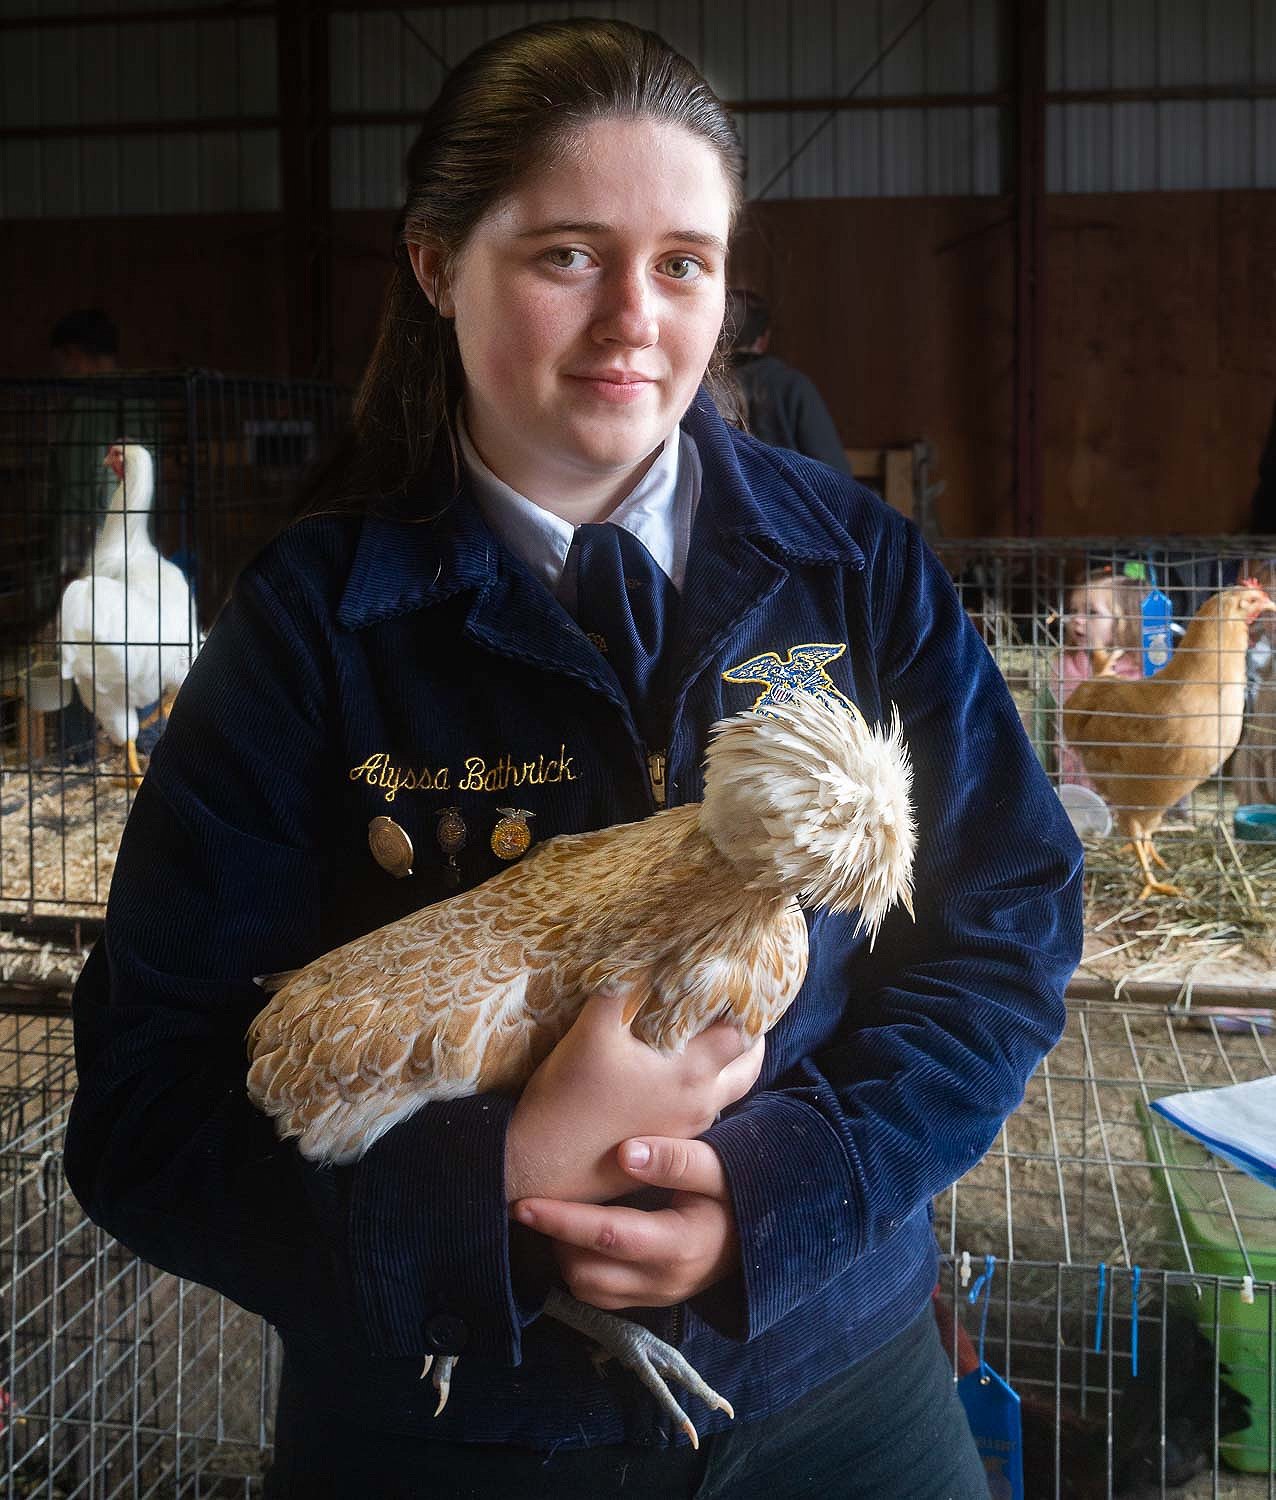 Young++farm+girl+with+her+prize+winning+chicken+at+the+pine+plains%2C+ag+fair+2018+pine+plains++Young++girl+with+her+prize+winning+chicken+at+the+pine+plains+ag+fair.++ny+ag+fair.+hen+bird+farm+girl..jpg